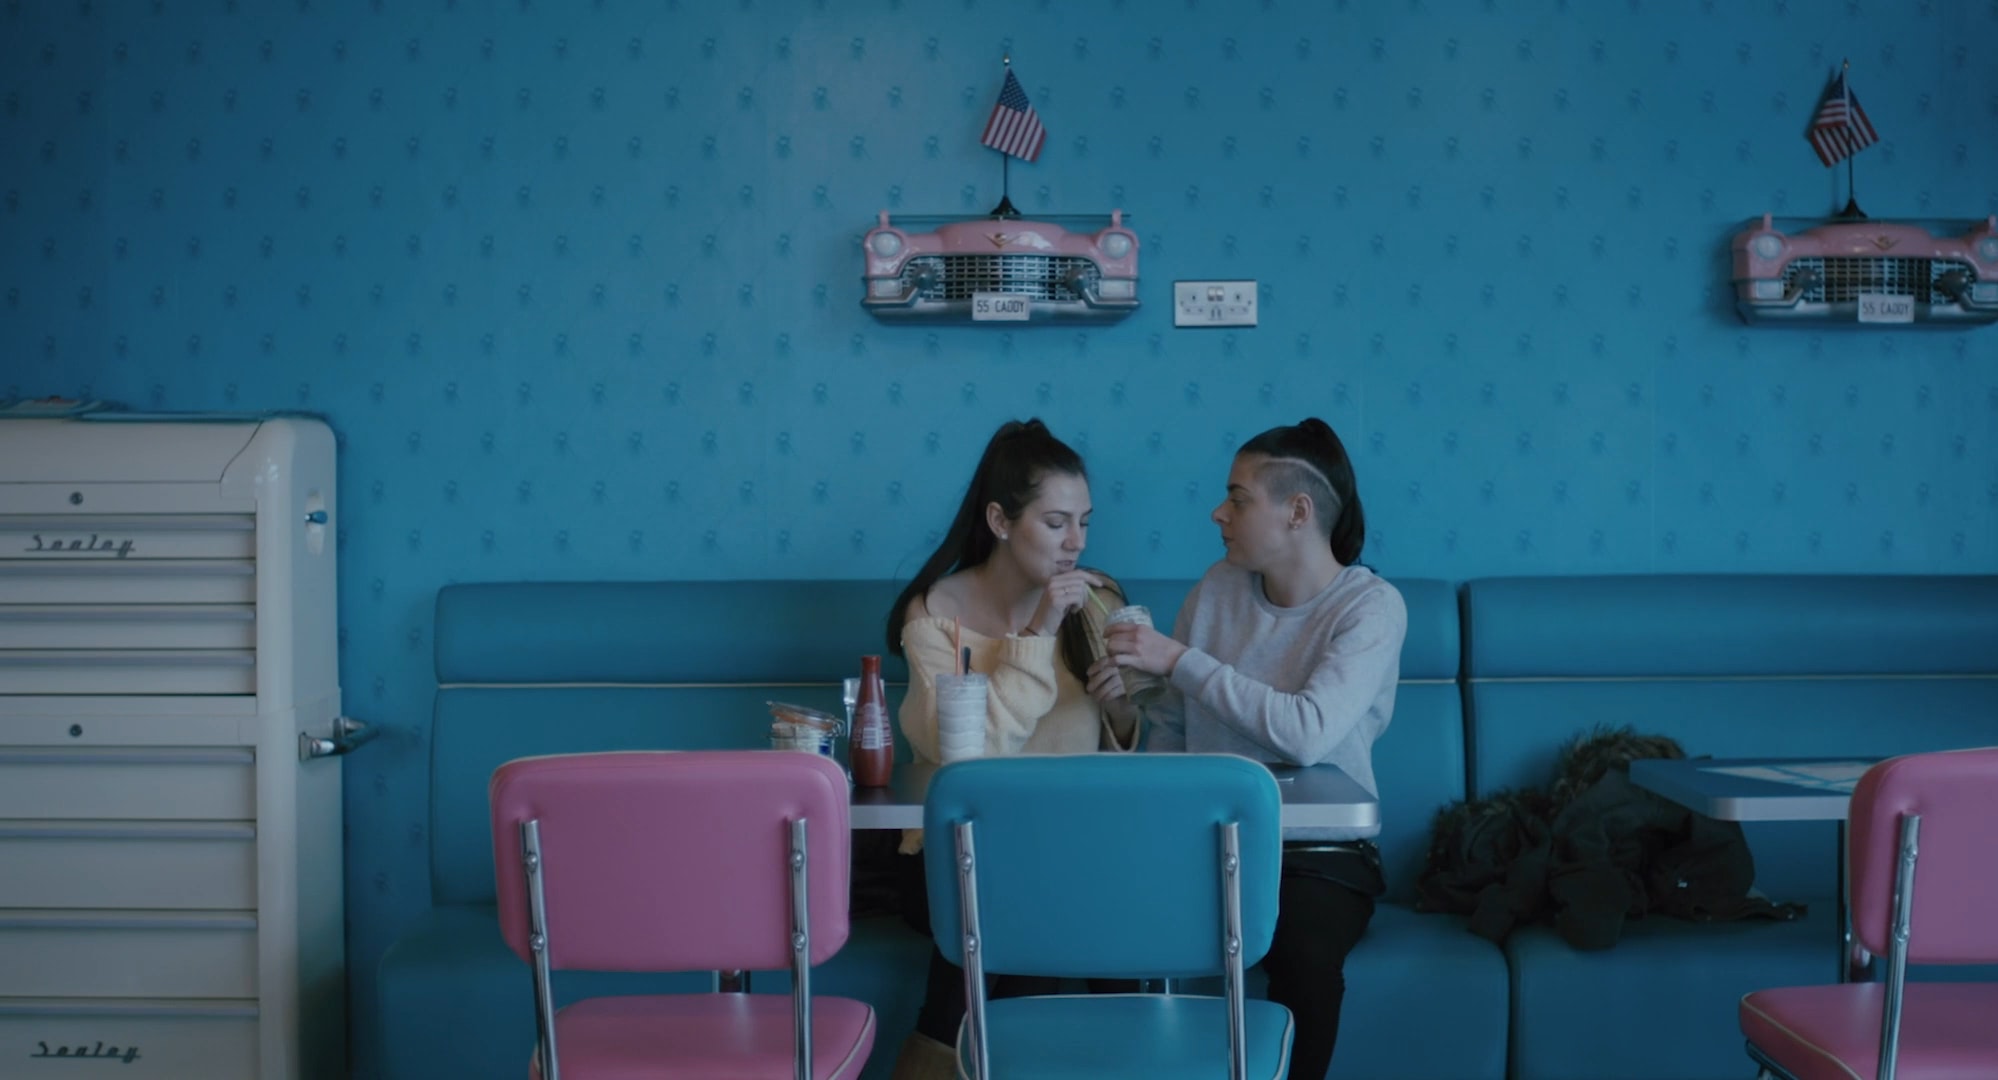 Two young women in an American diner drinking a milk shake and looking at each other.